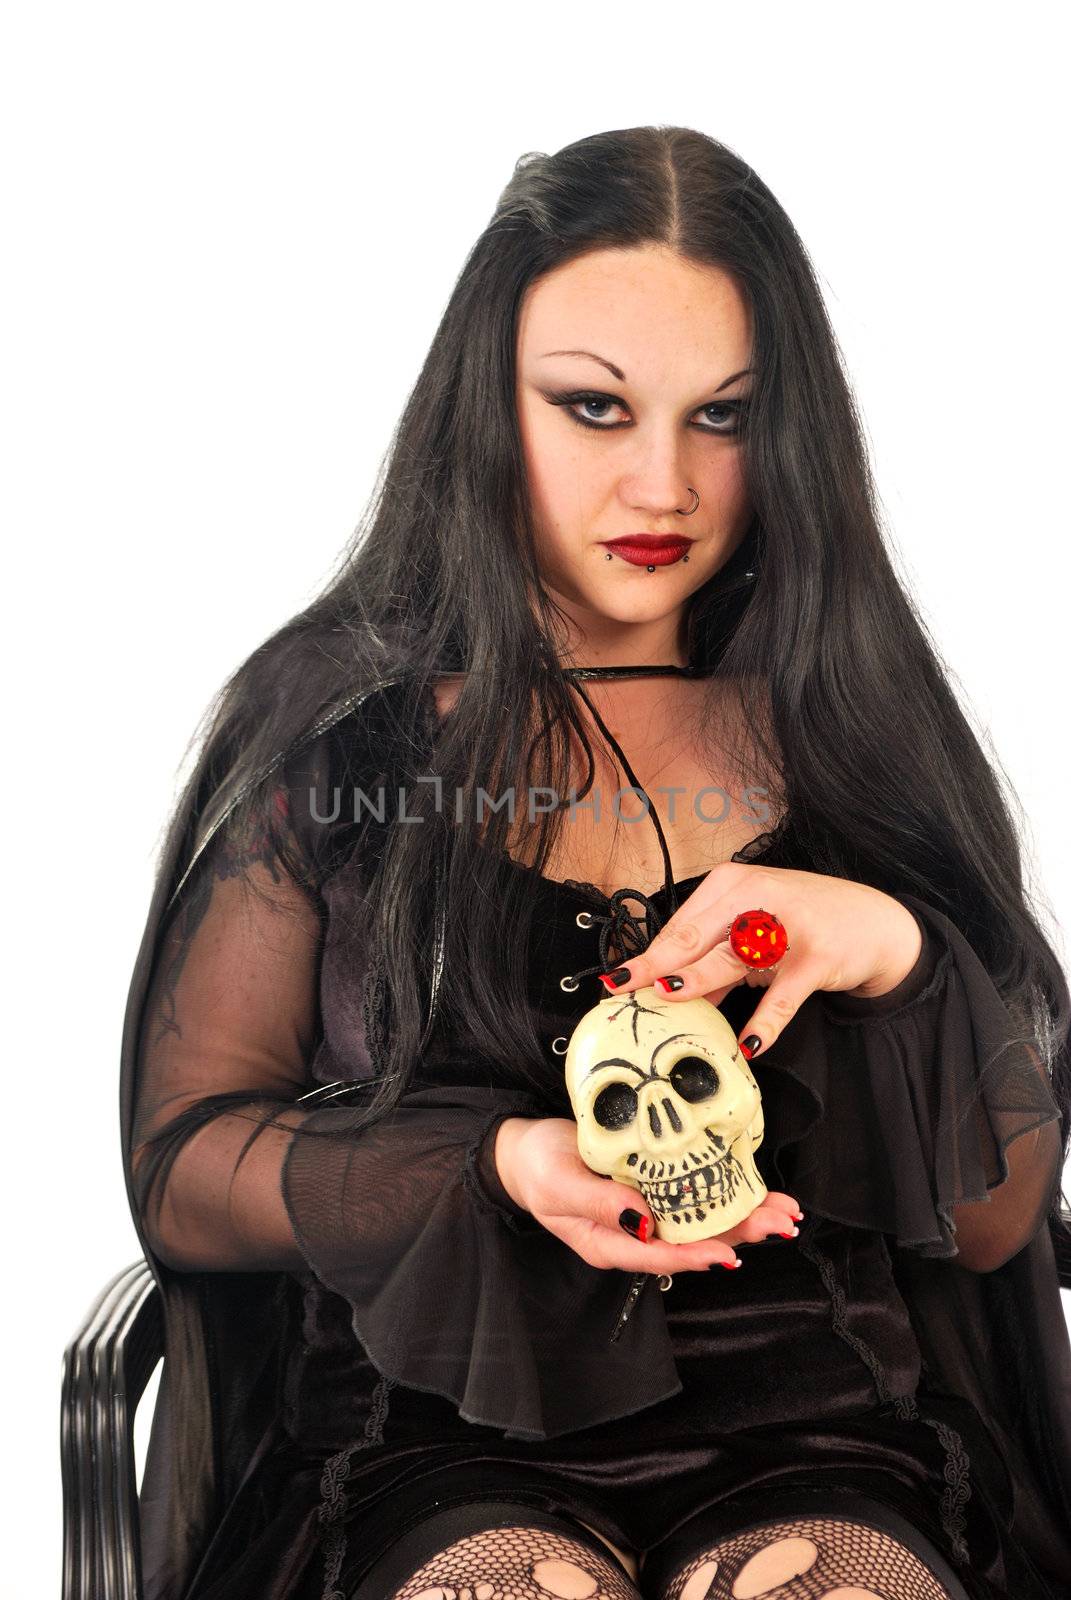 evil woman in blackwith skull